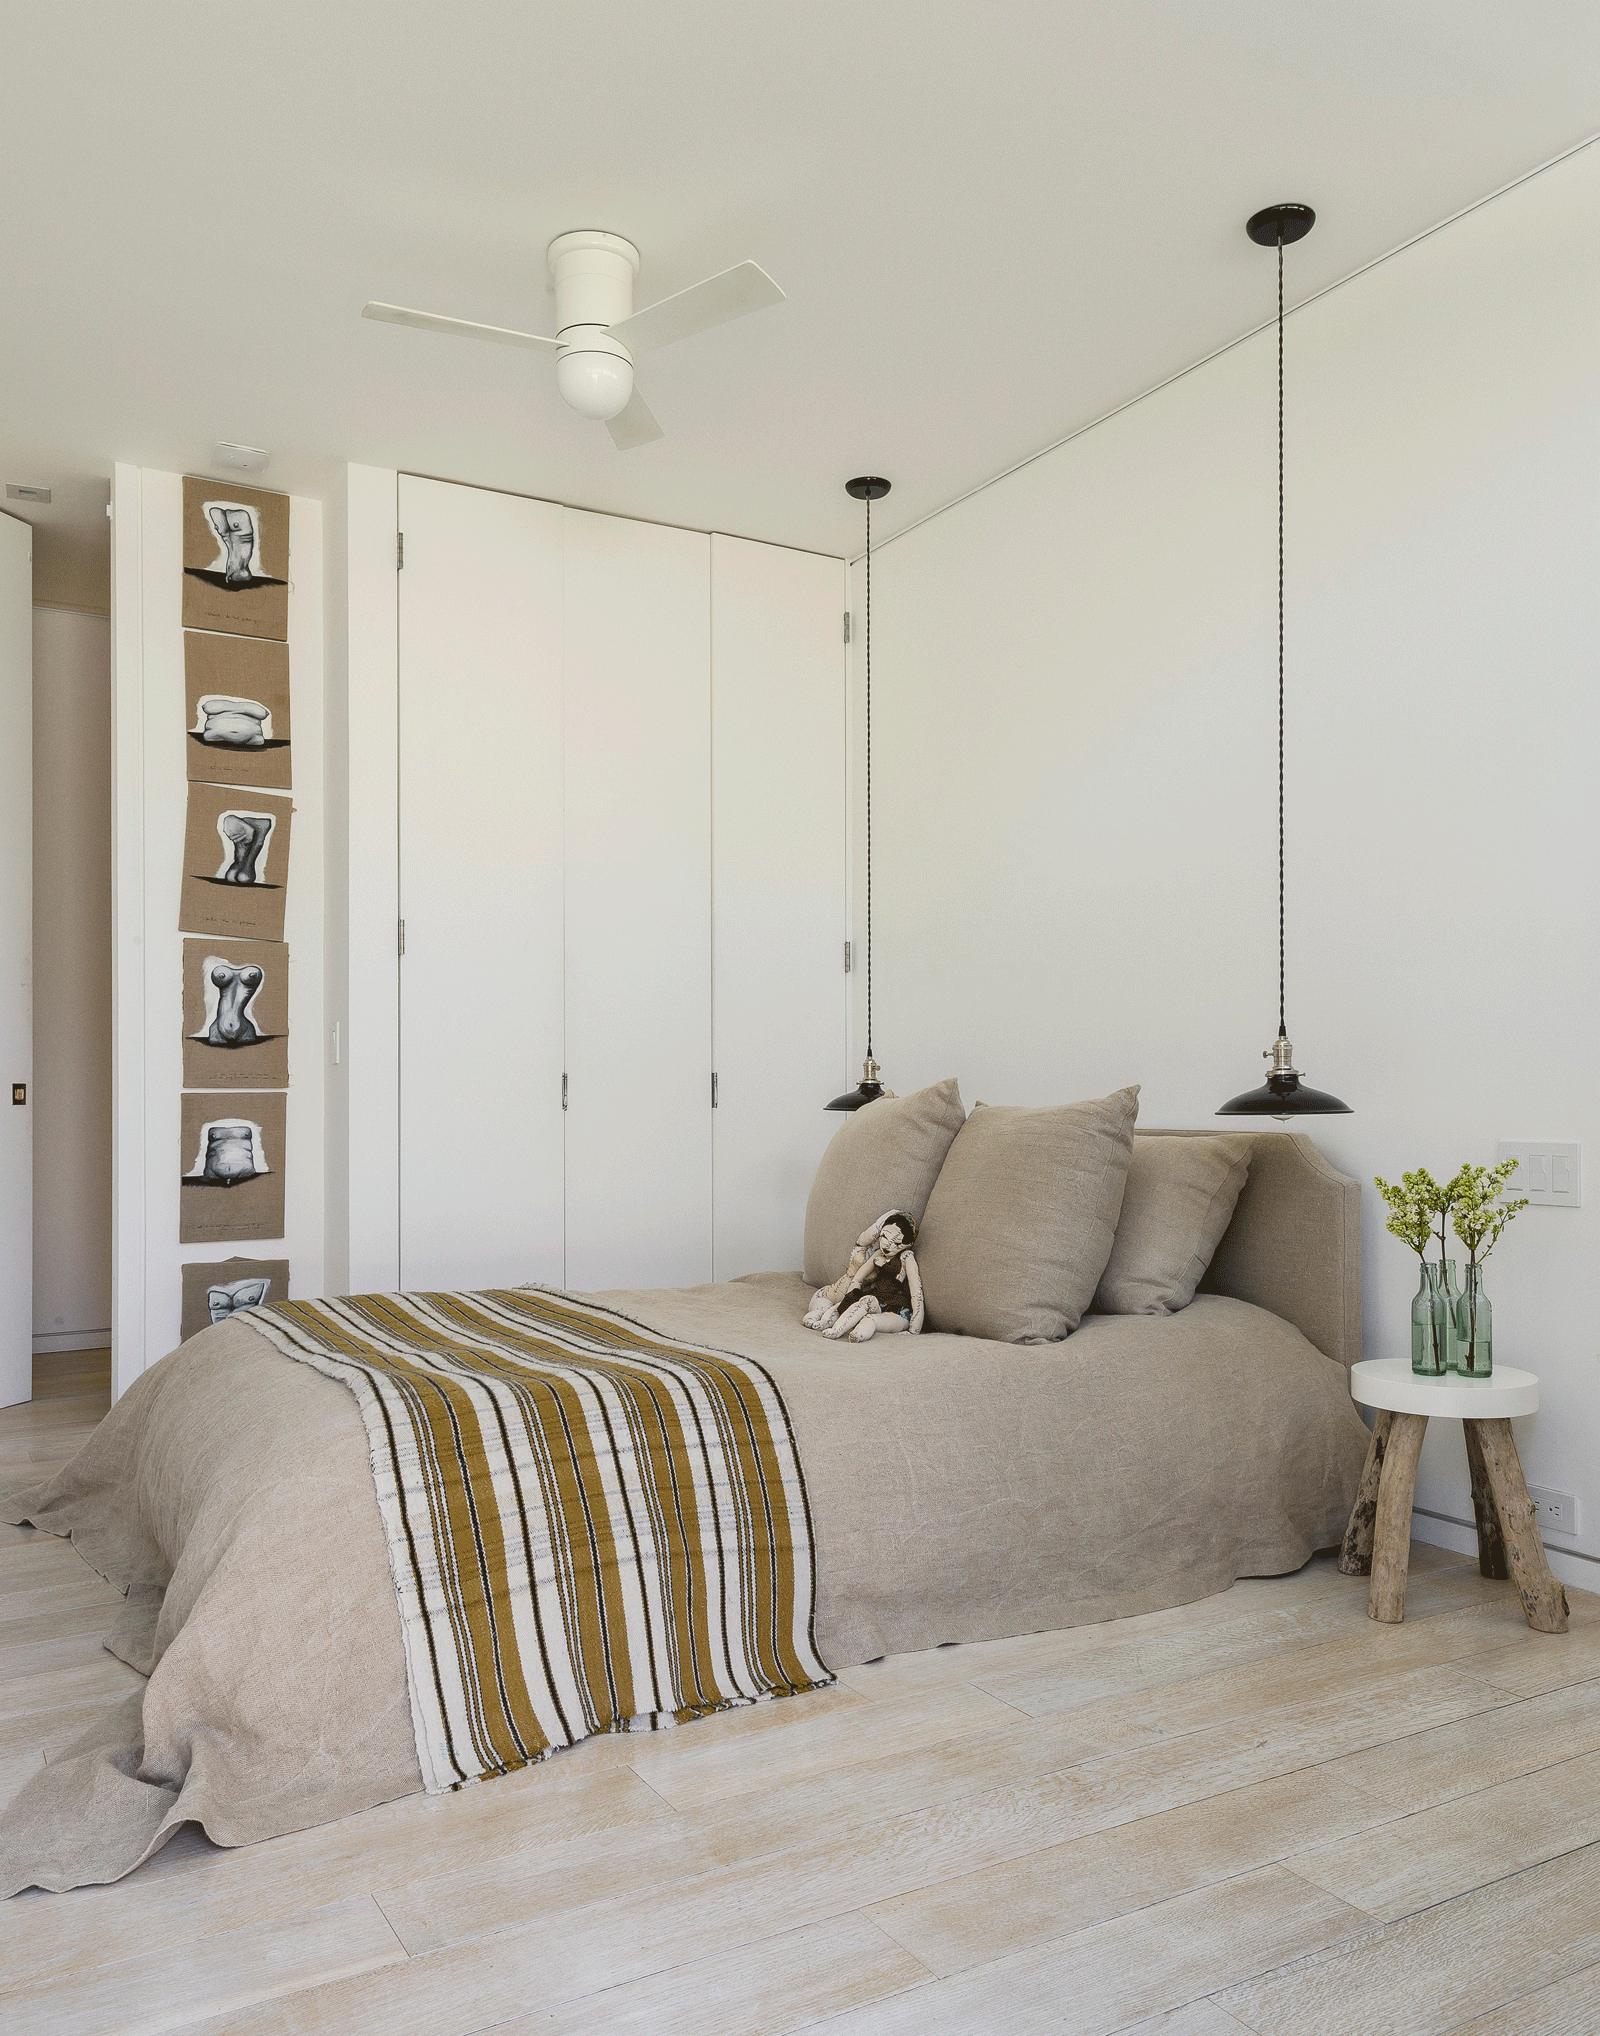 Guest bedroom with white walls and beige bedding and black pendant lights as bedside lights